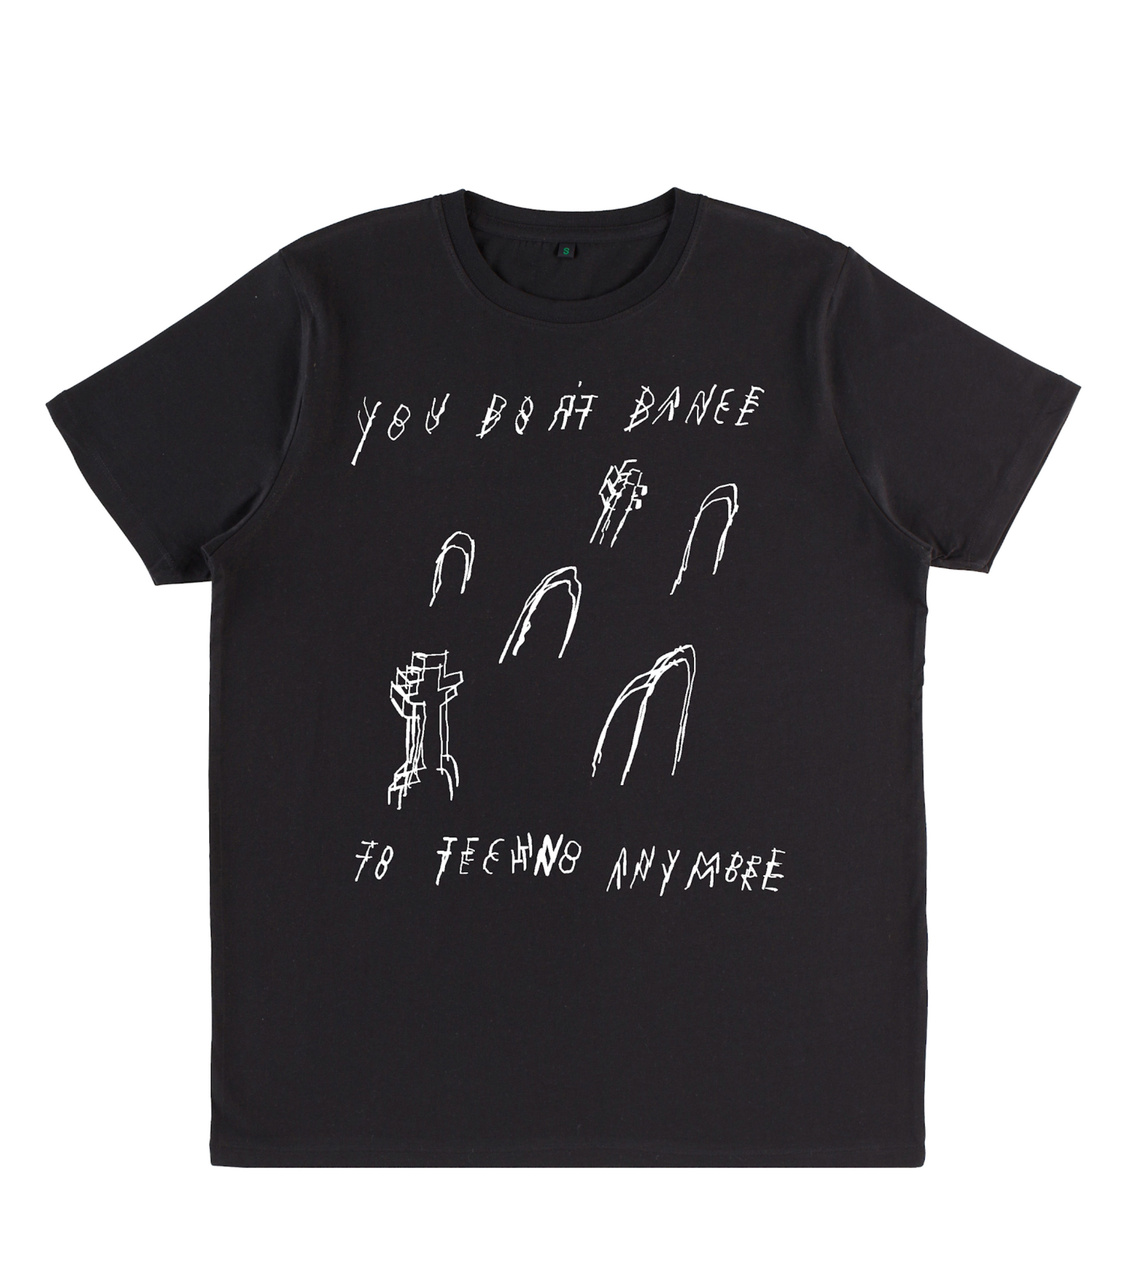 White screen printed T shirt , Design made by artist Mary Naylor. Raising money for The Ben Raemers Foundation. To help support suicide awareness. 
It reads ‘ You don’t dance to Tecno anymore’ and features a graveyard.